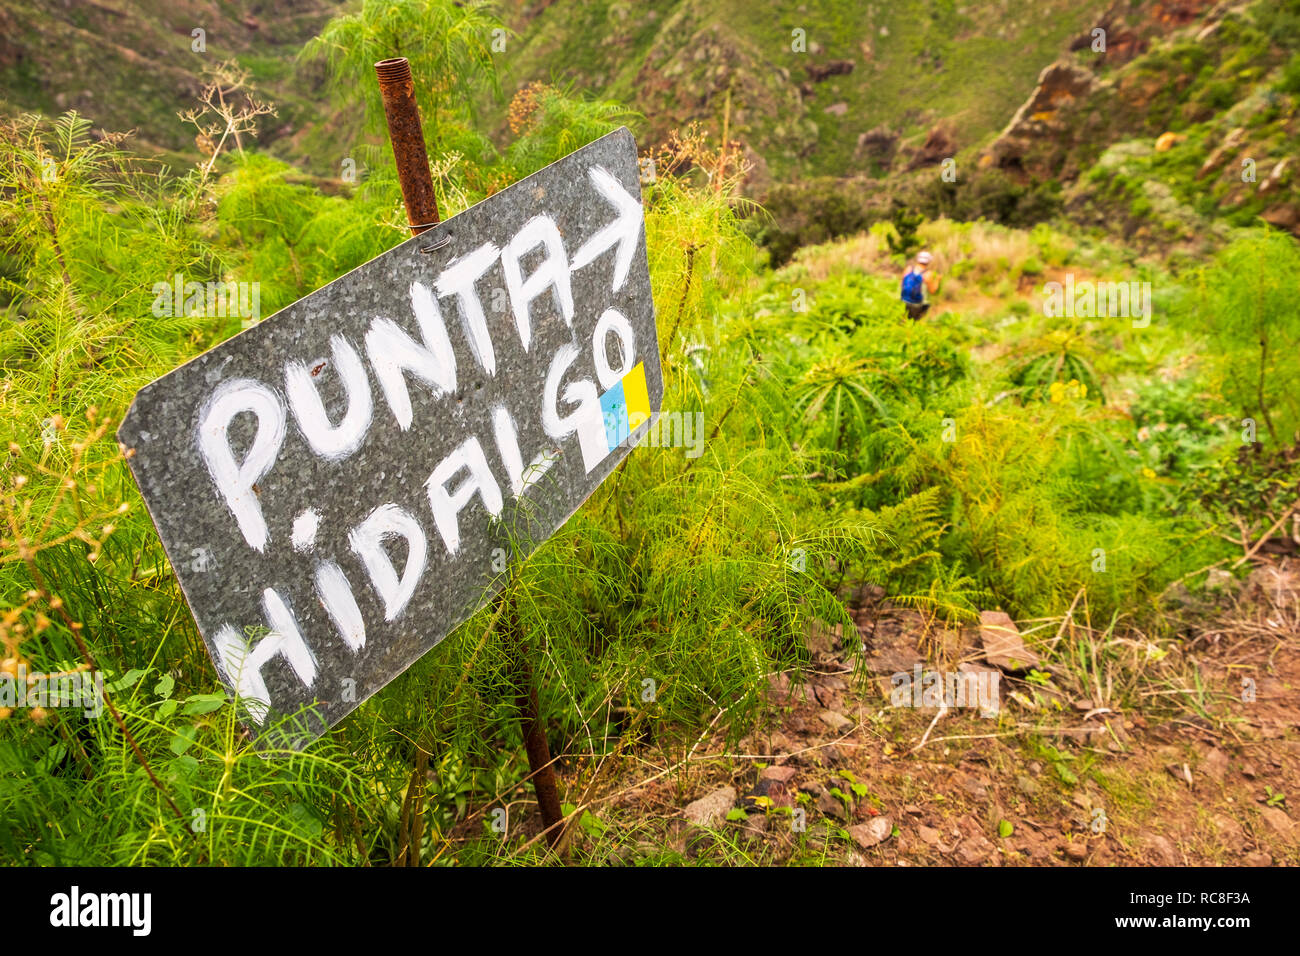 Hand painted metal sign indicating the direction of the walking route to Punta Hidalgo from El Batan, Anaga, Tenerife, Canary Islands, Spain Stock Photo